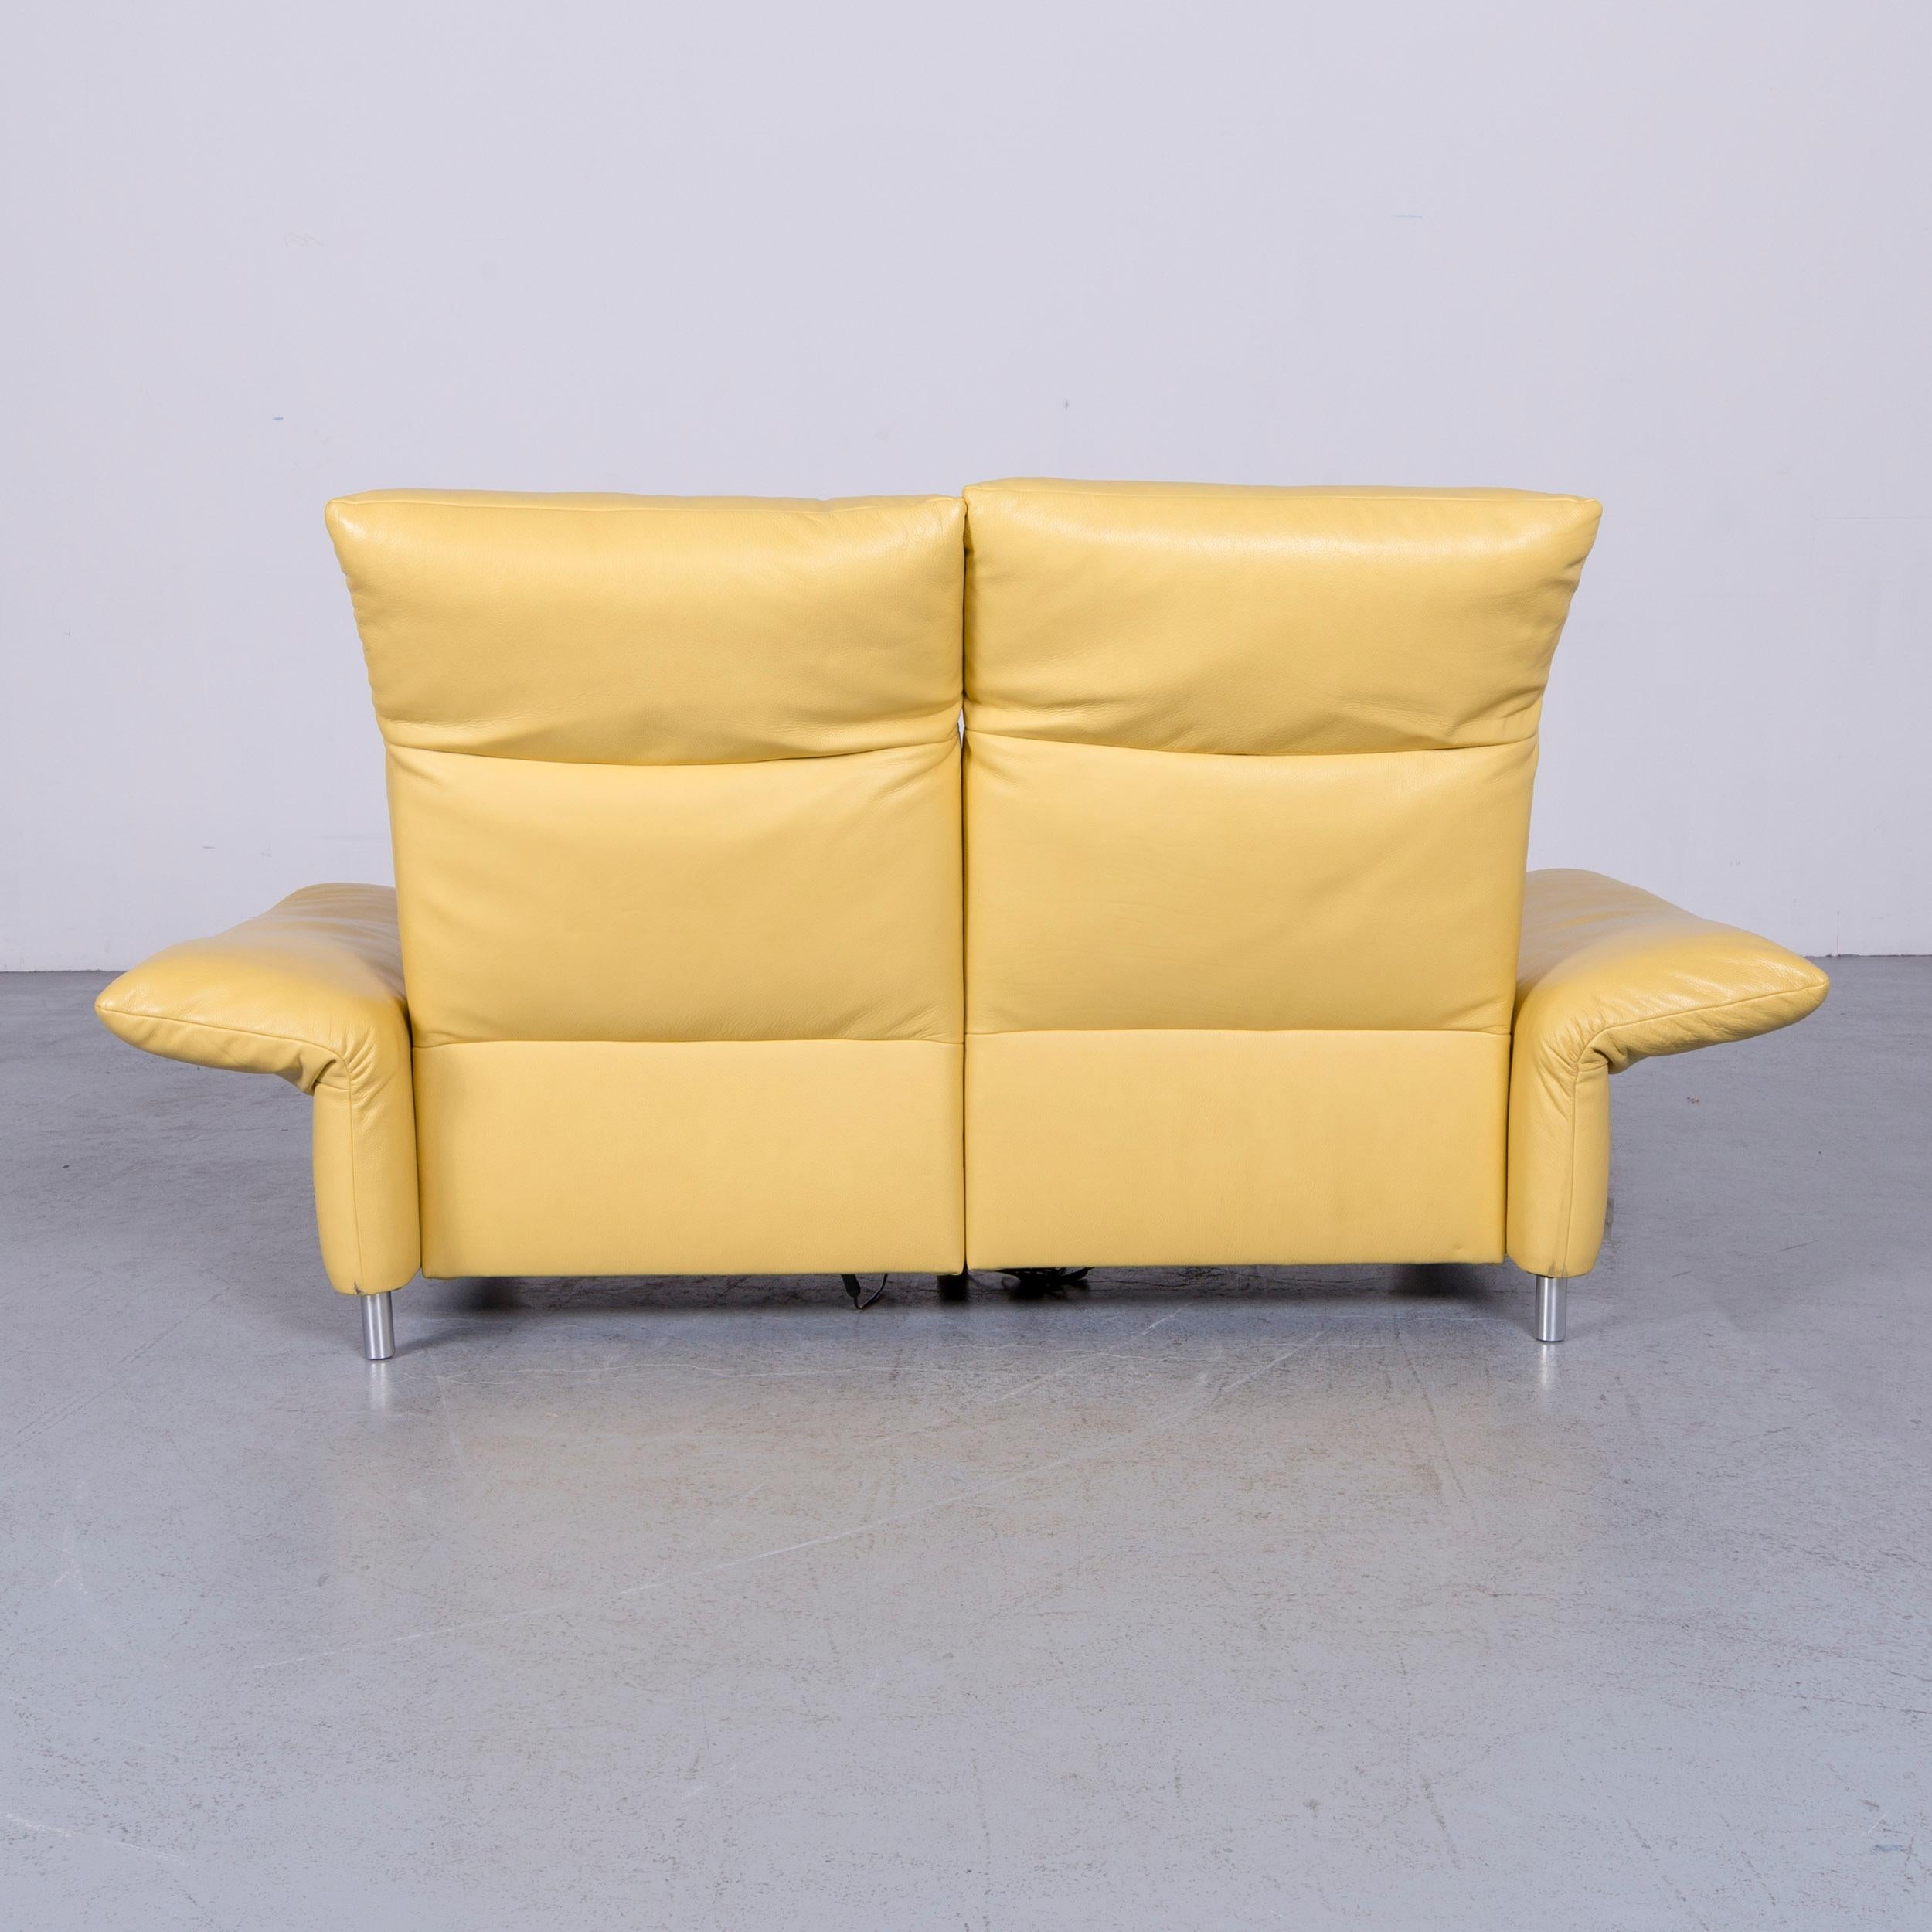 Koinor Elena Designer Two-Seat Sofa Yellow Leather Electric Function Couch 6